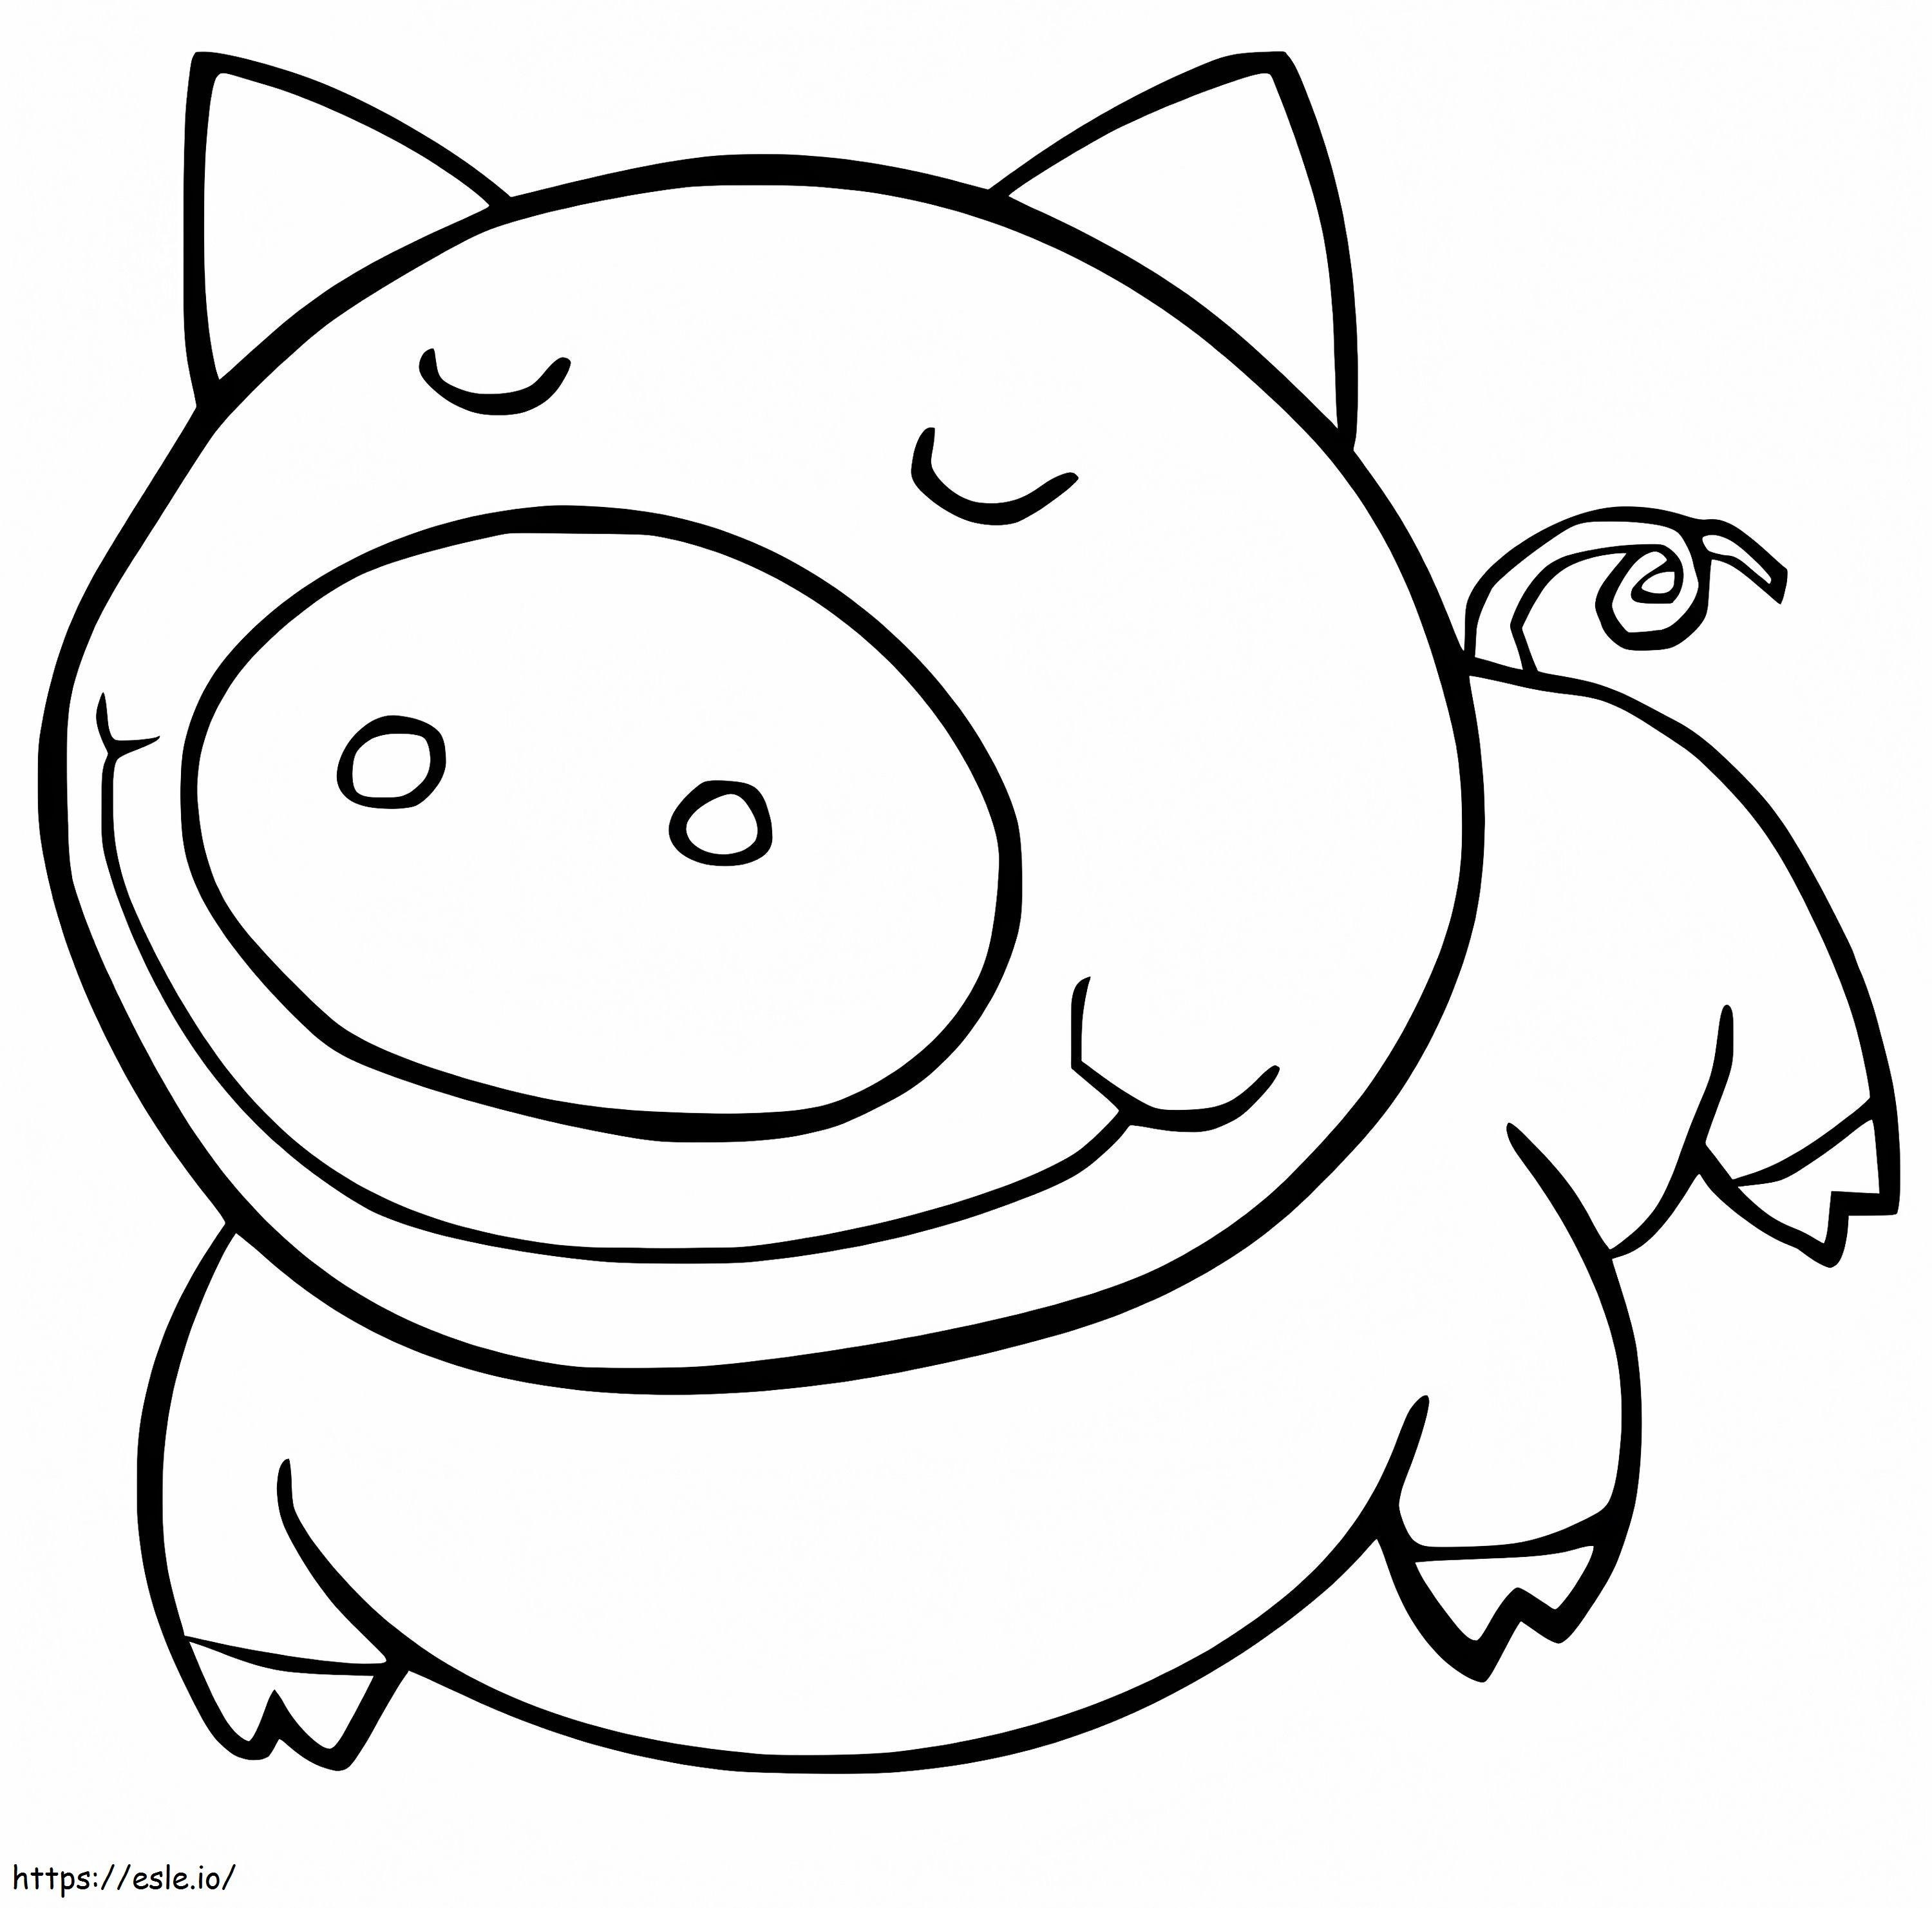 Fat Baby Pig coloring page